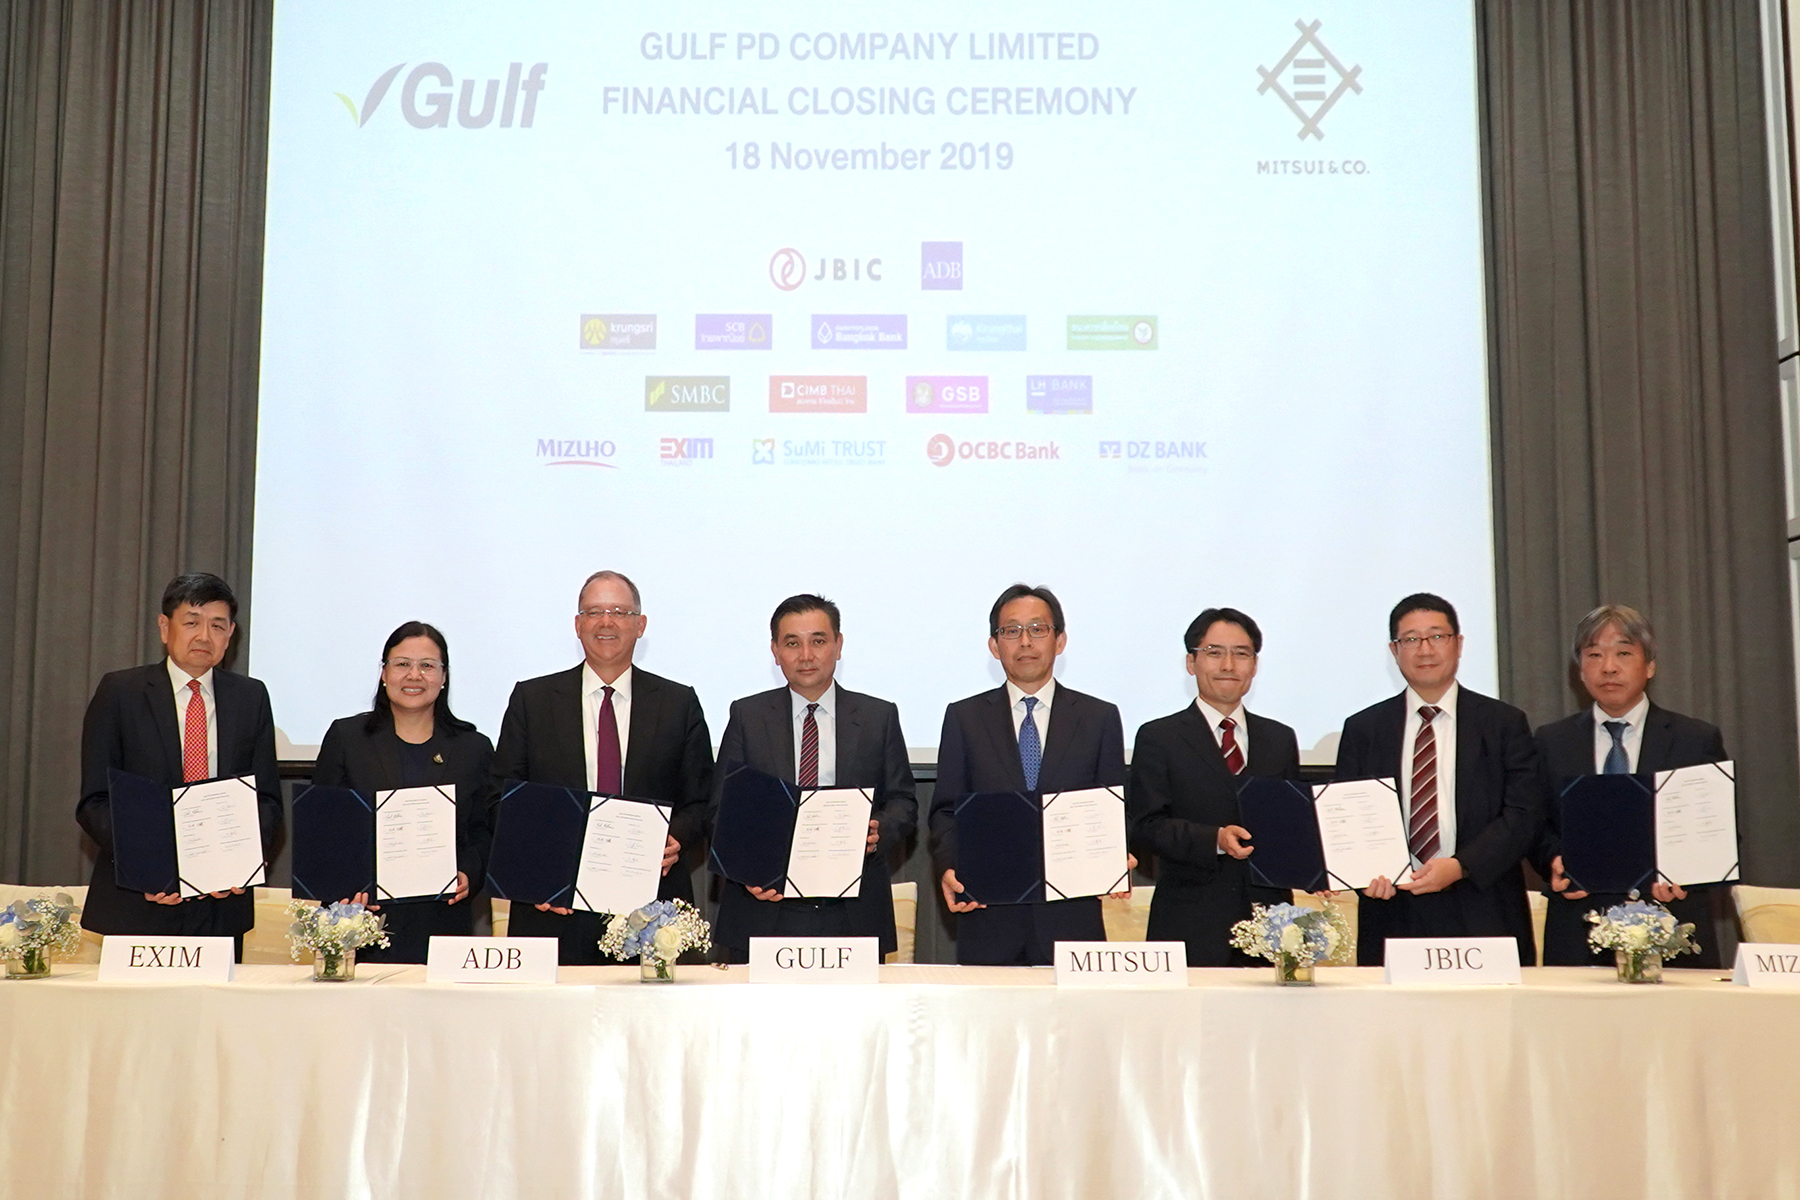 EXIM Thailand Supports Gulf PD’s Development of Gas-fired IPP in EEC